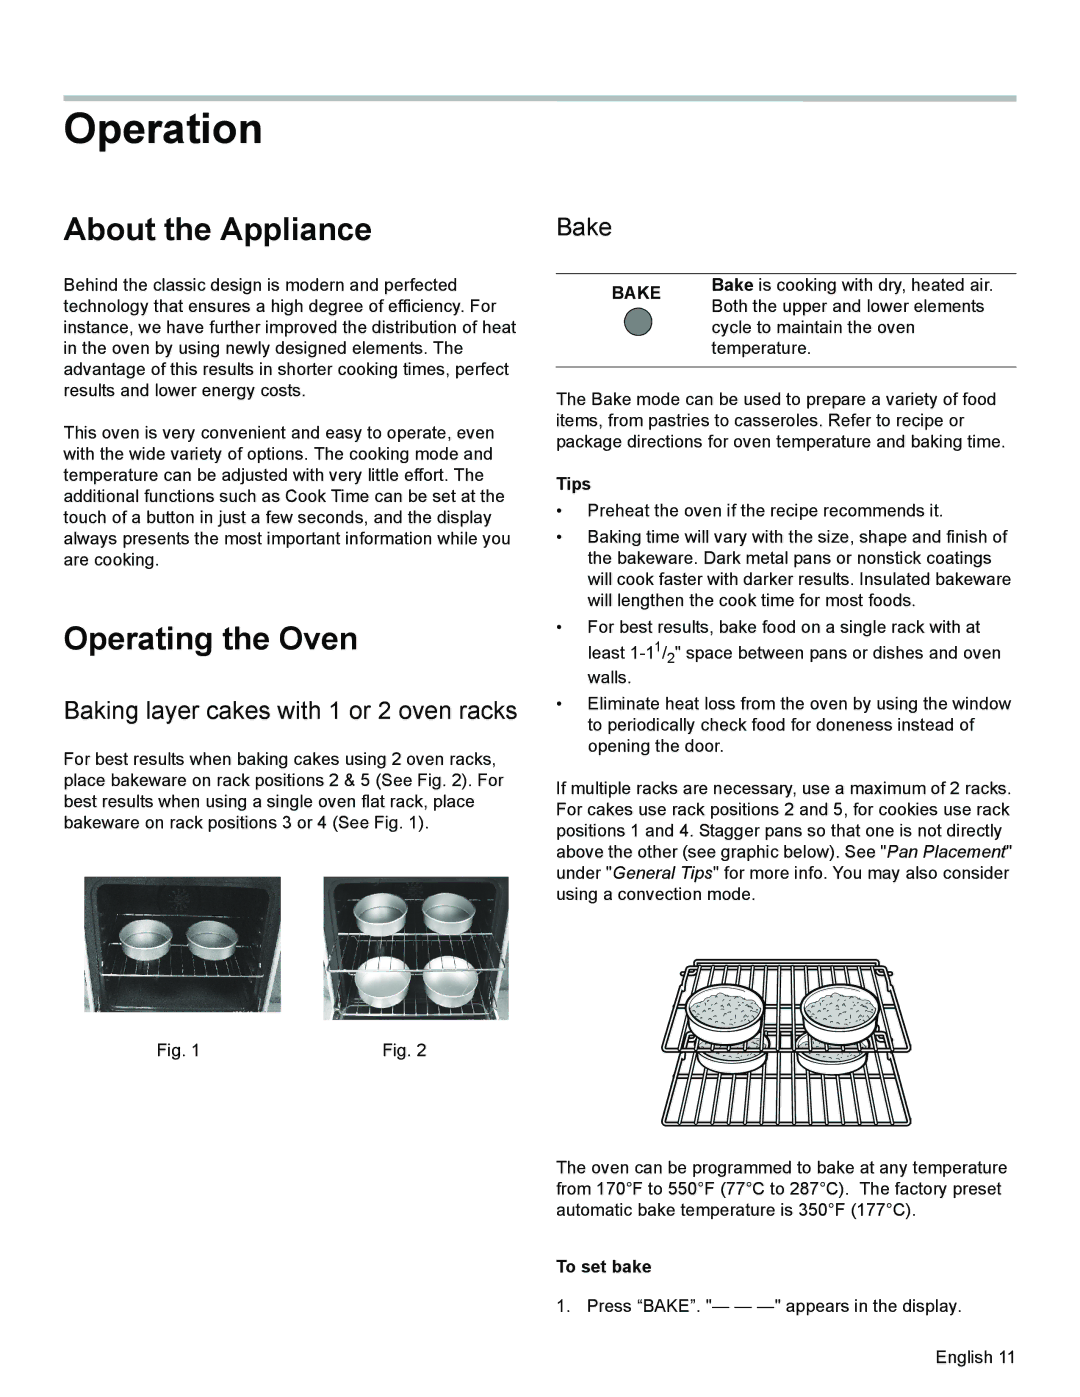 Bosch Appliances HES3023U Operation, About the Appliance, Operating the Oven, Baking layer cakes with 1 or 2 oven racks 